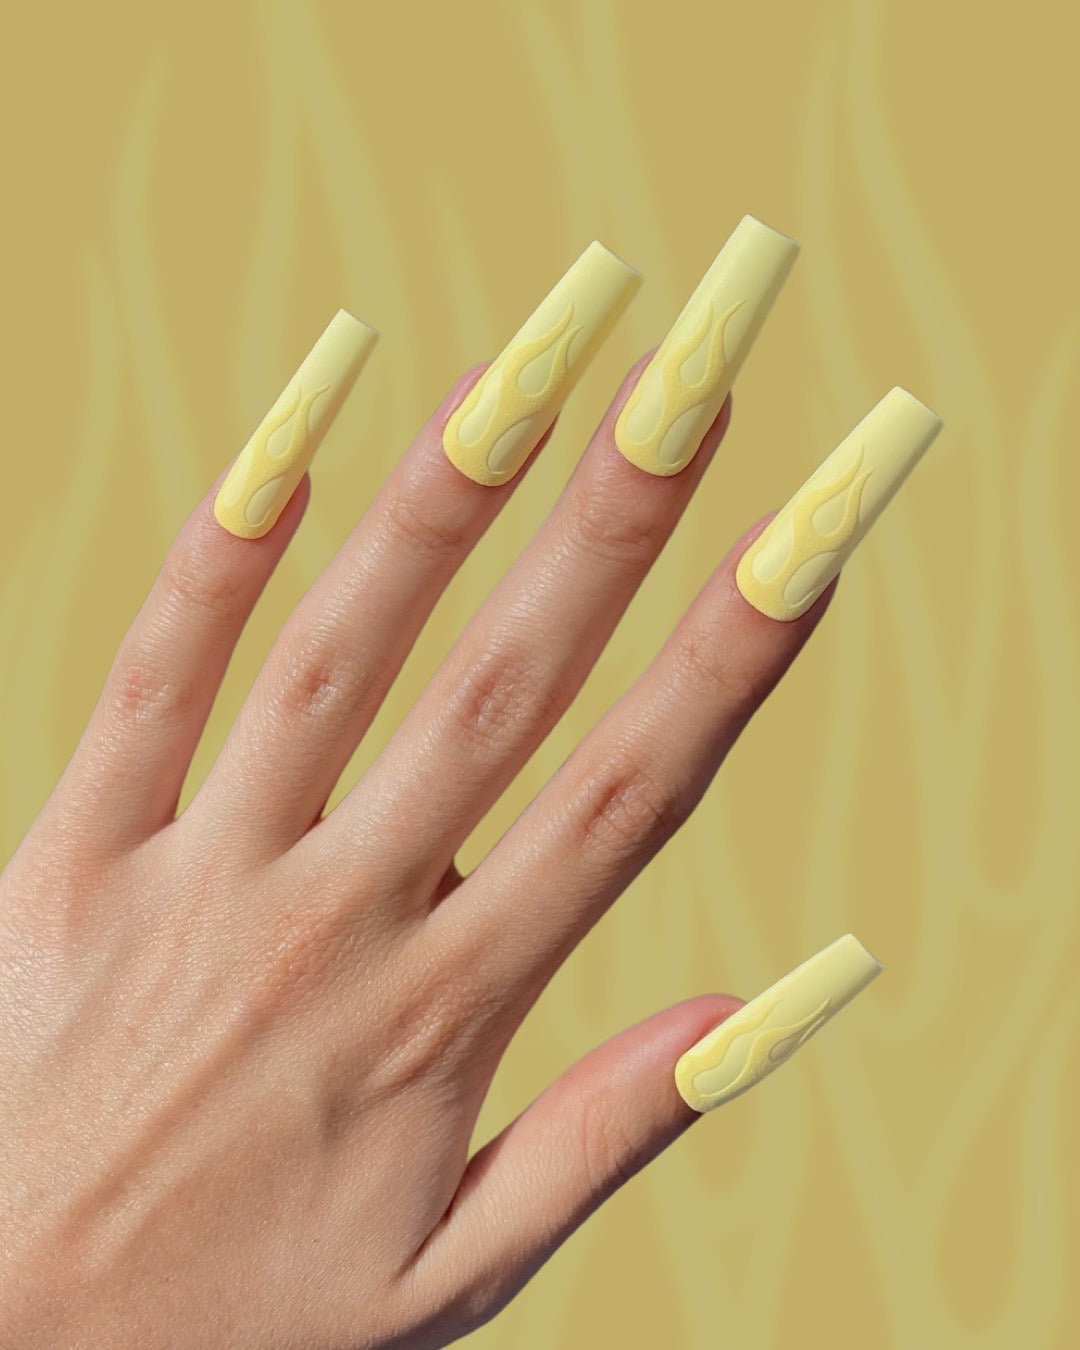 Neon Nail Art Is The Bright New Manicure Trend You Can Nail At Home